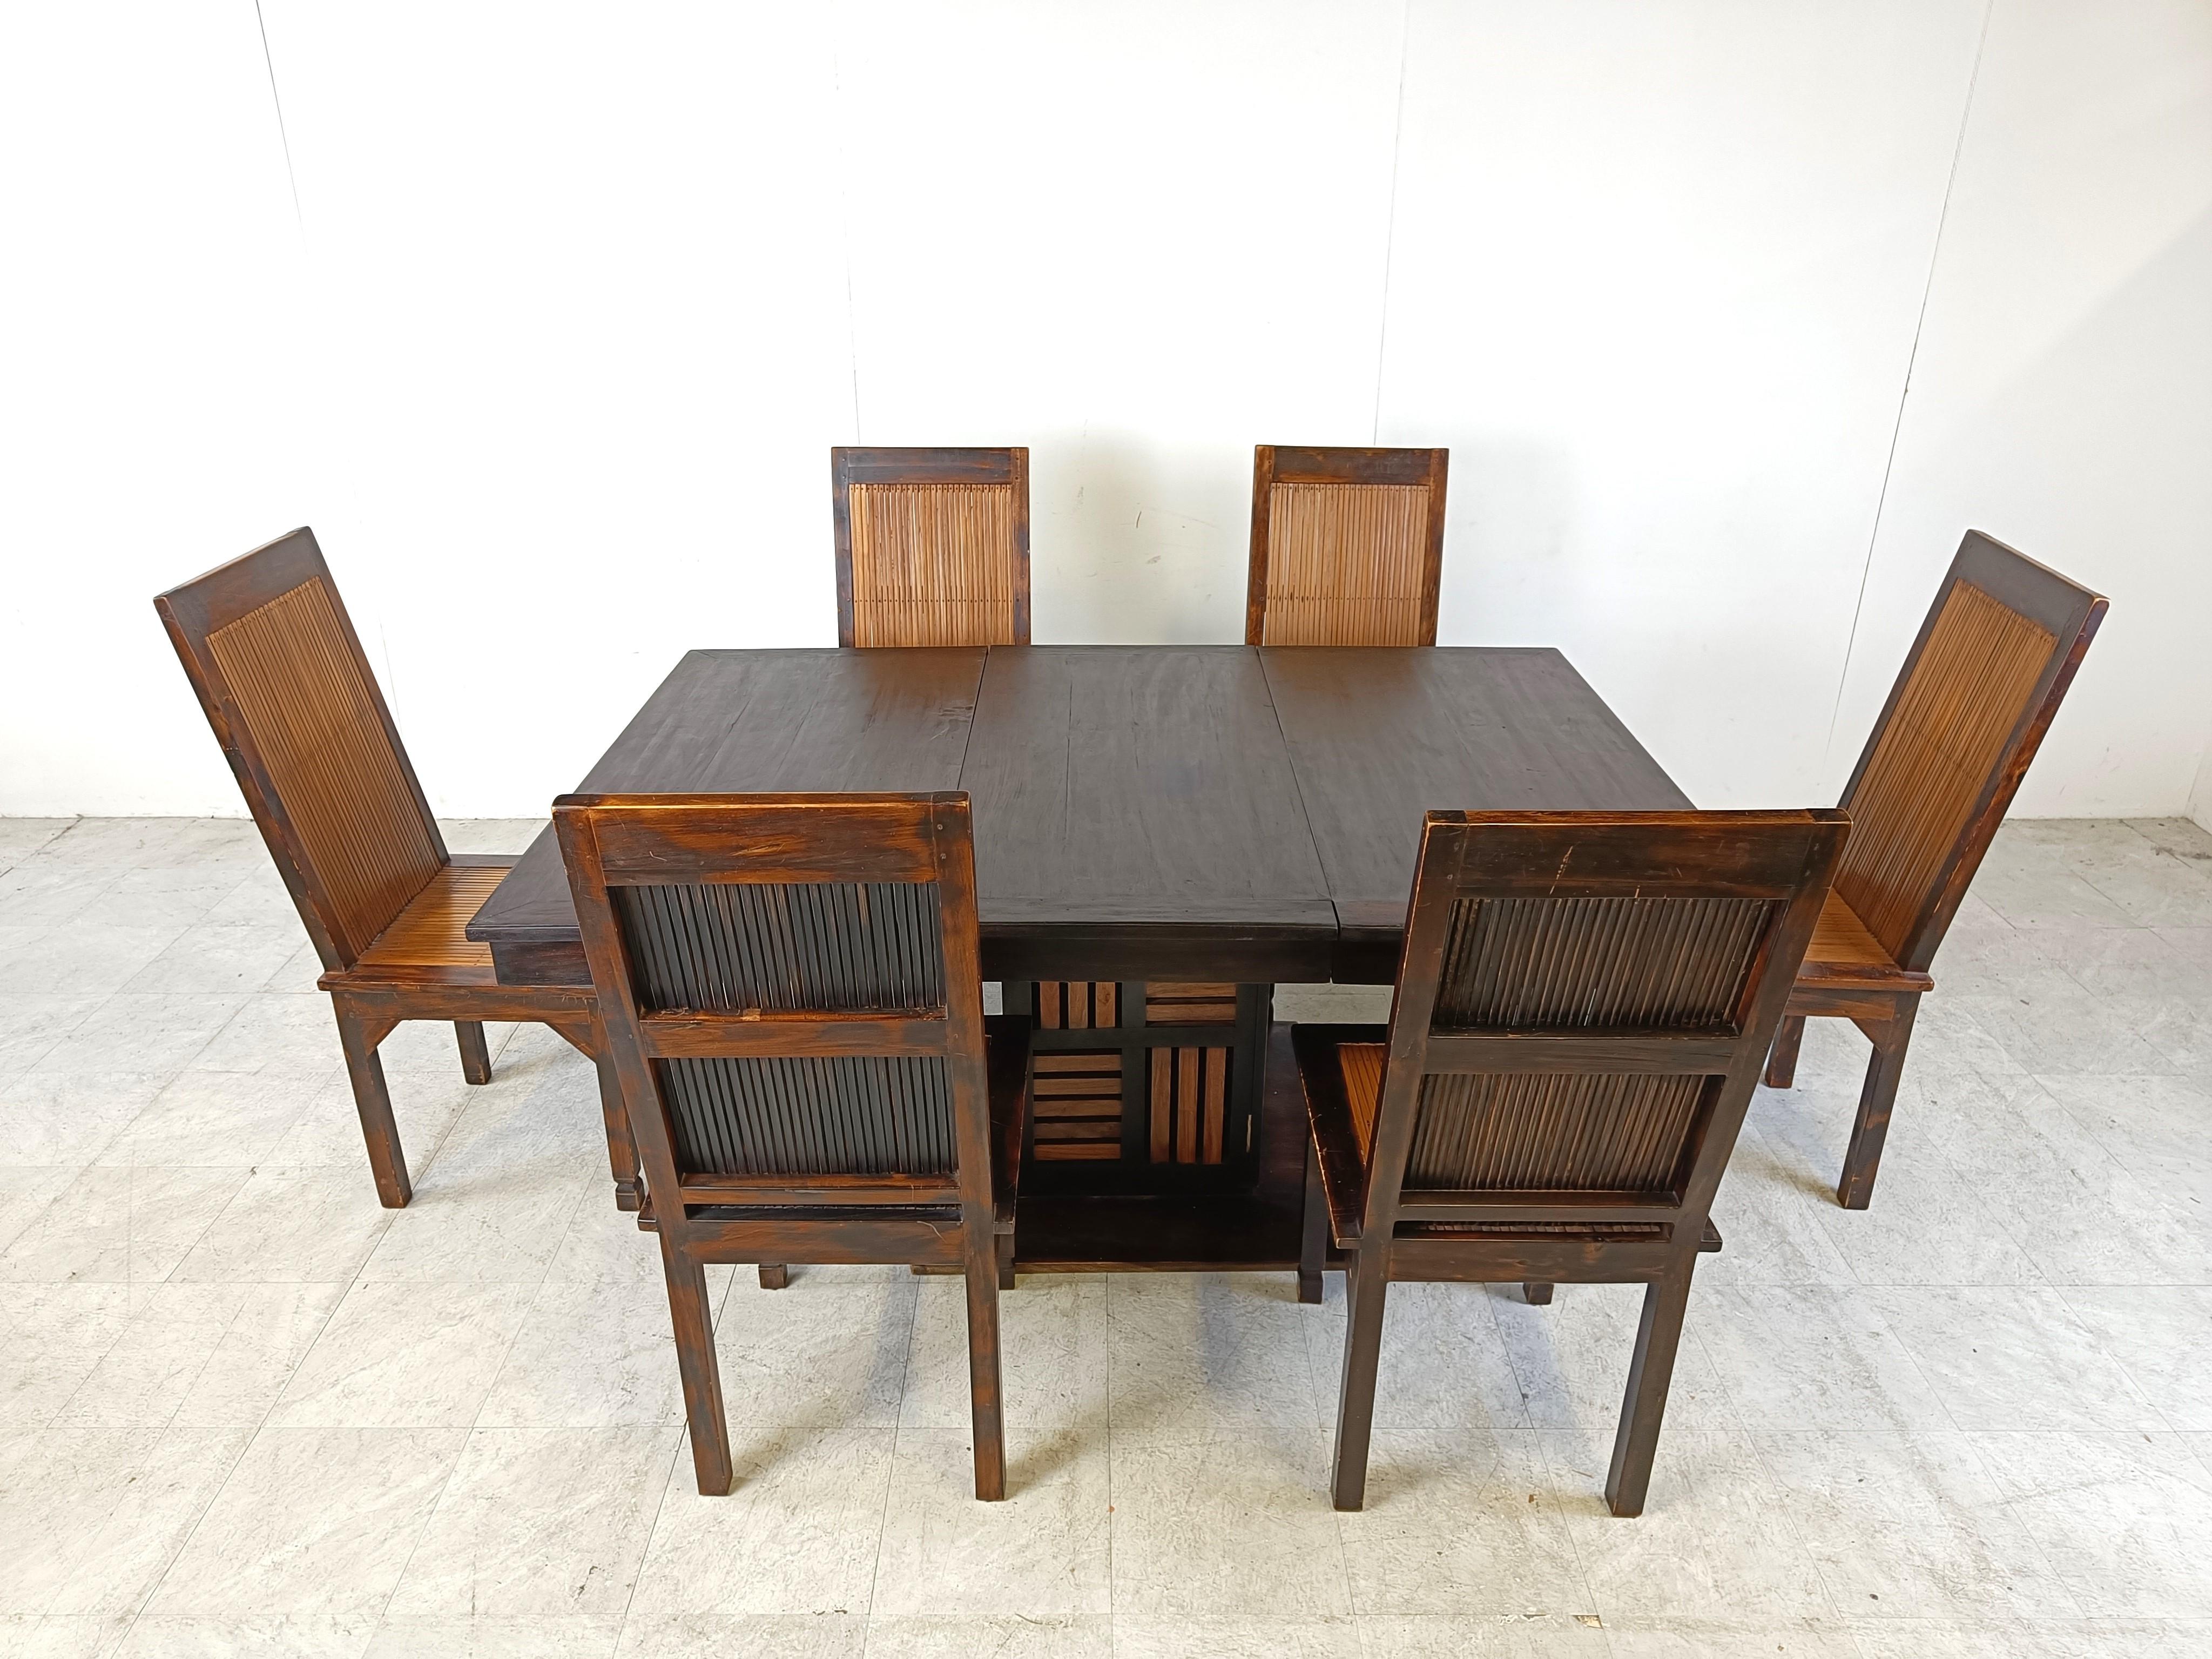 Ethnic dining set consisting of an extendable dining table with a storage compartment and six dining chairs

Beautiful set made from exotic wood and bamboo reeded seats and backrests.

Very well made and sturdy dining set.

1960s - Asia

Dimensions